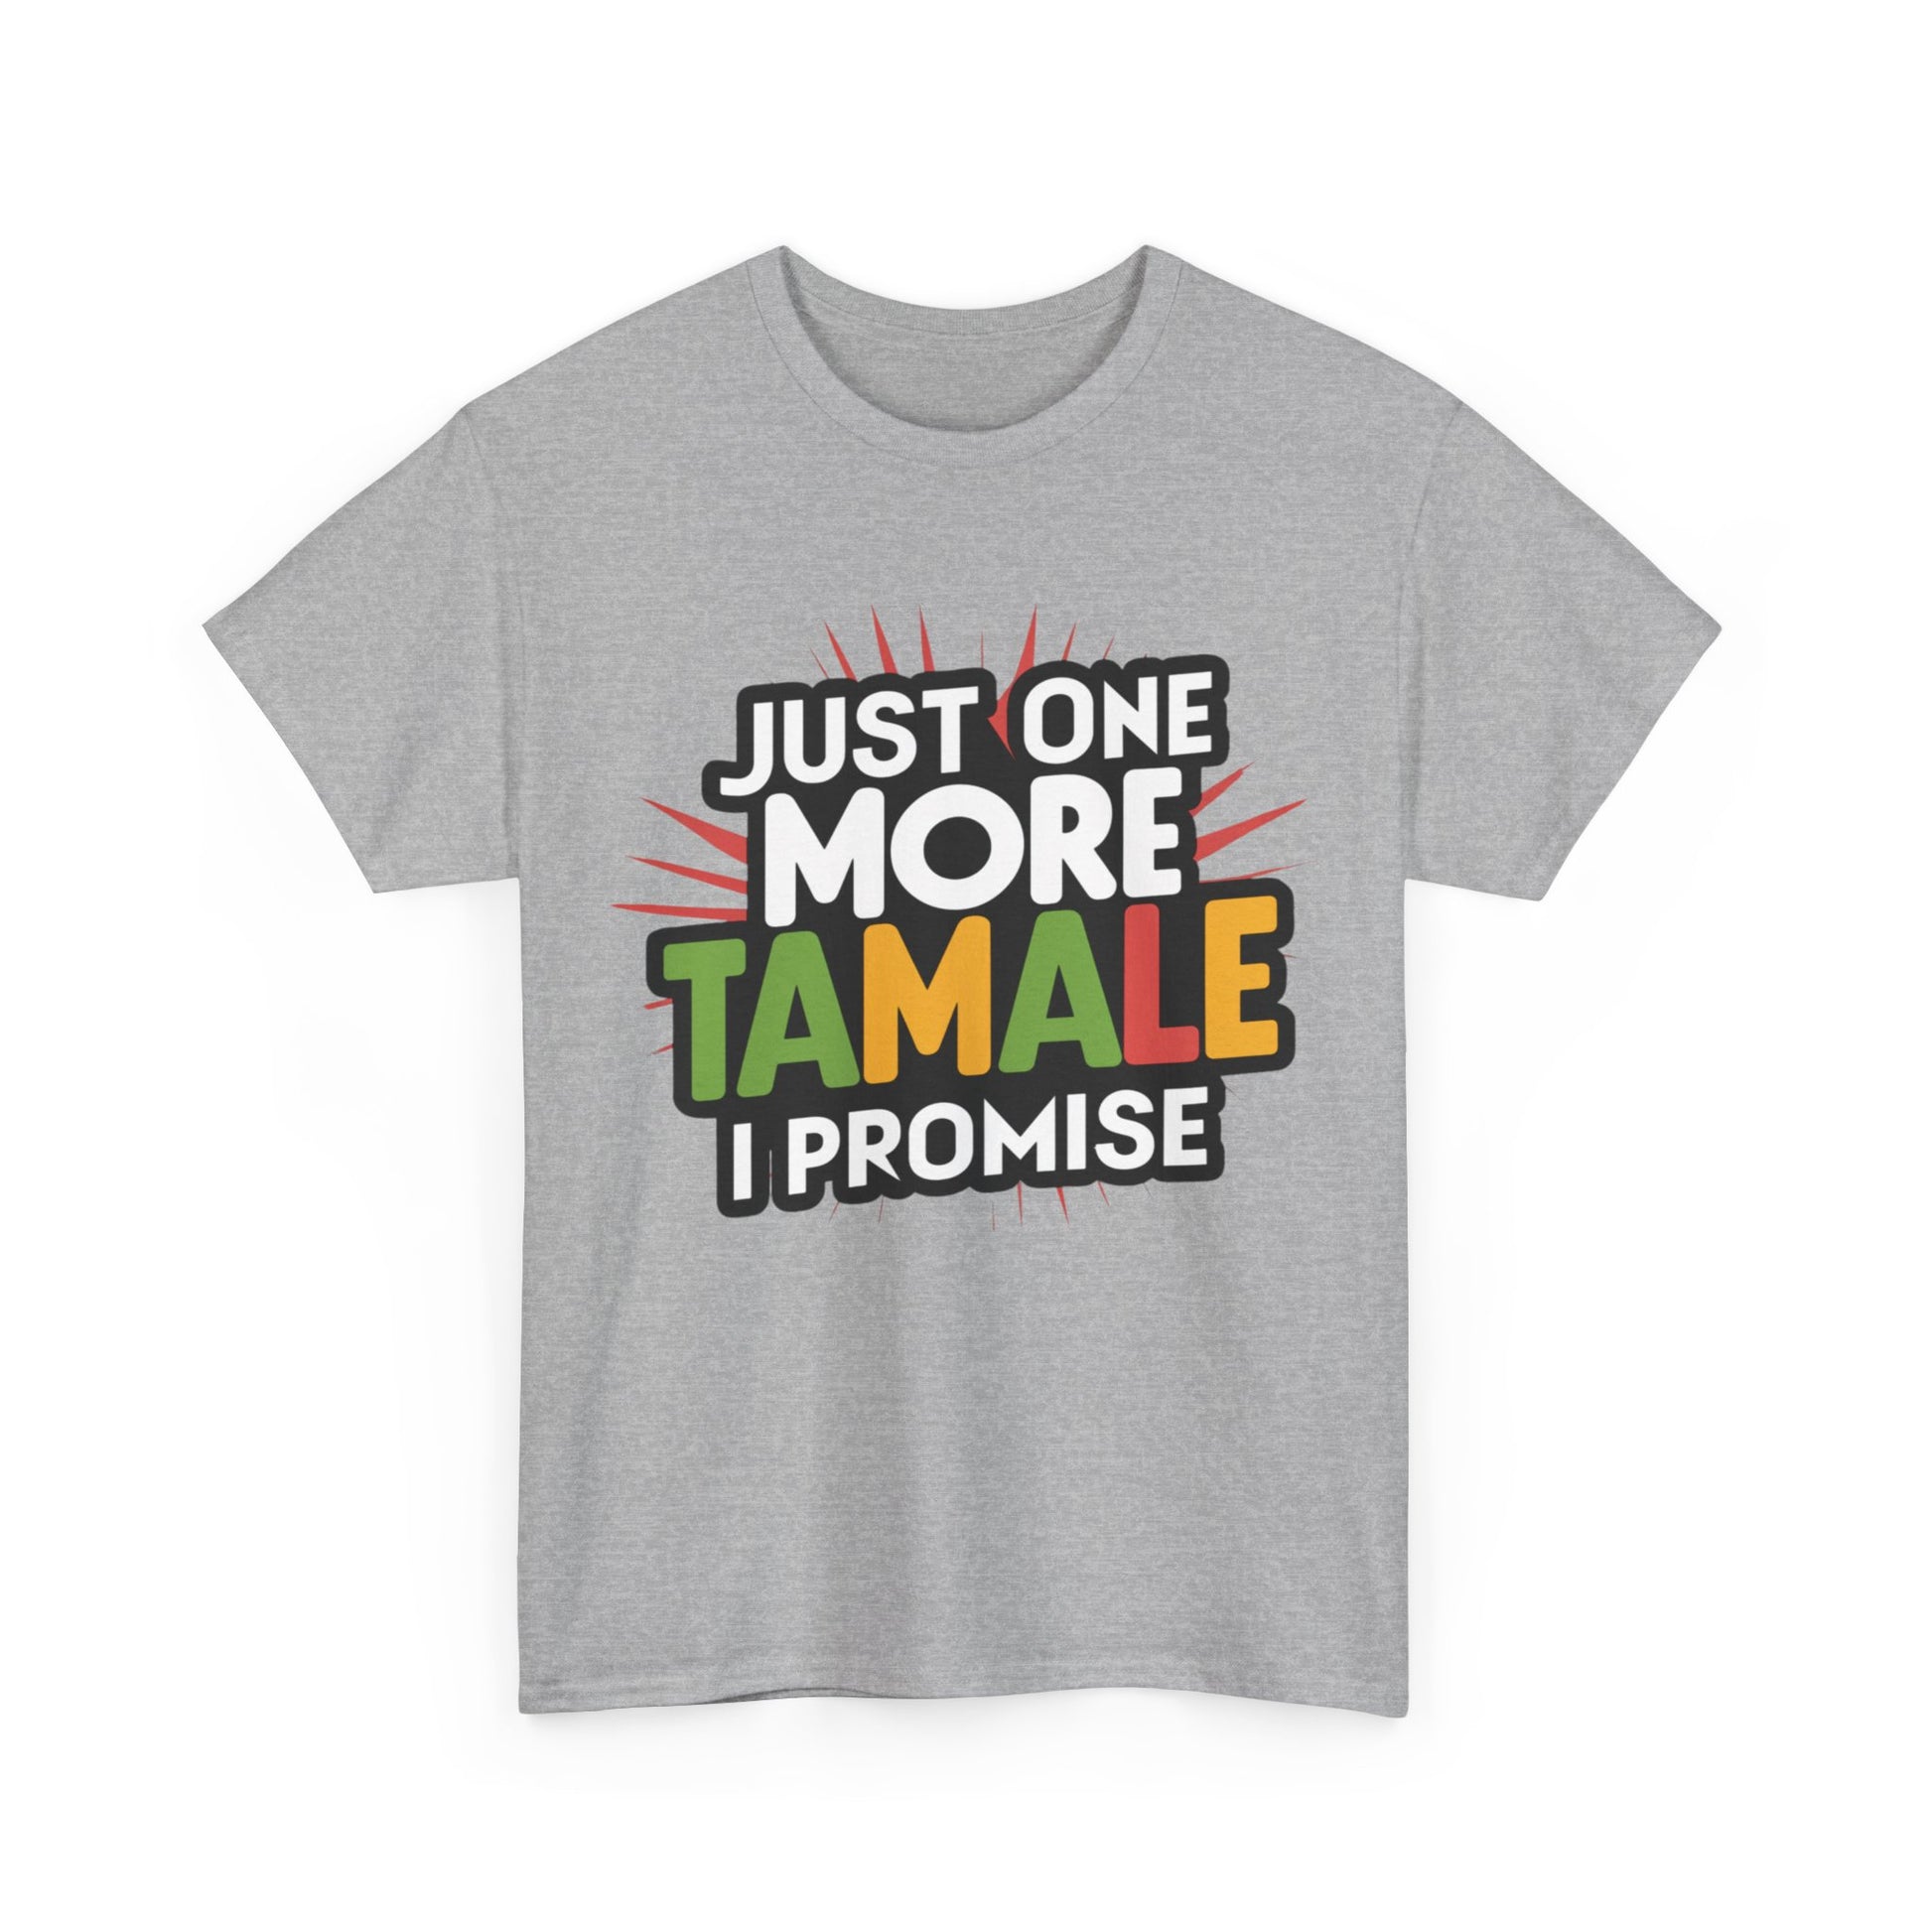 Just One More Tamale I Promise Mexican Food Graphic Unisex Heavy Cotton Tee Cotton Funny Humorous Graphic Soft Premium Unisex Men Women Sport Grey T-shirt Birthday Gift-39